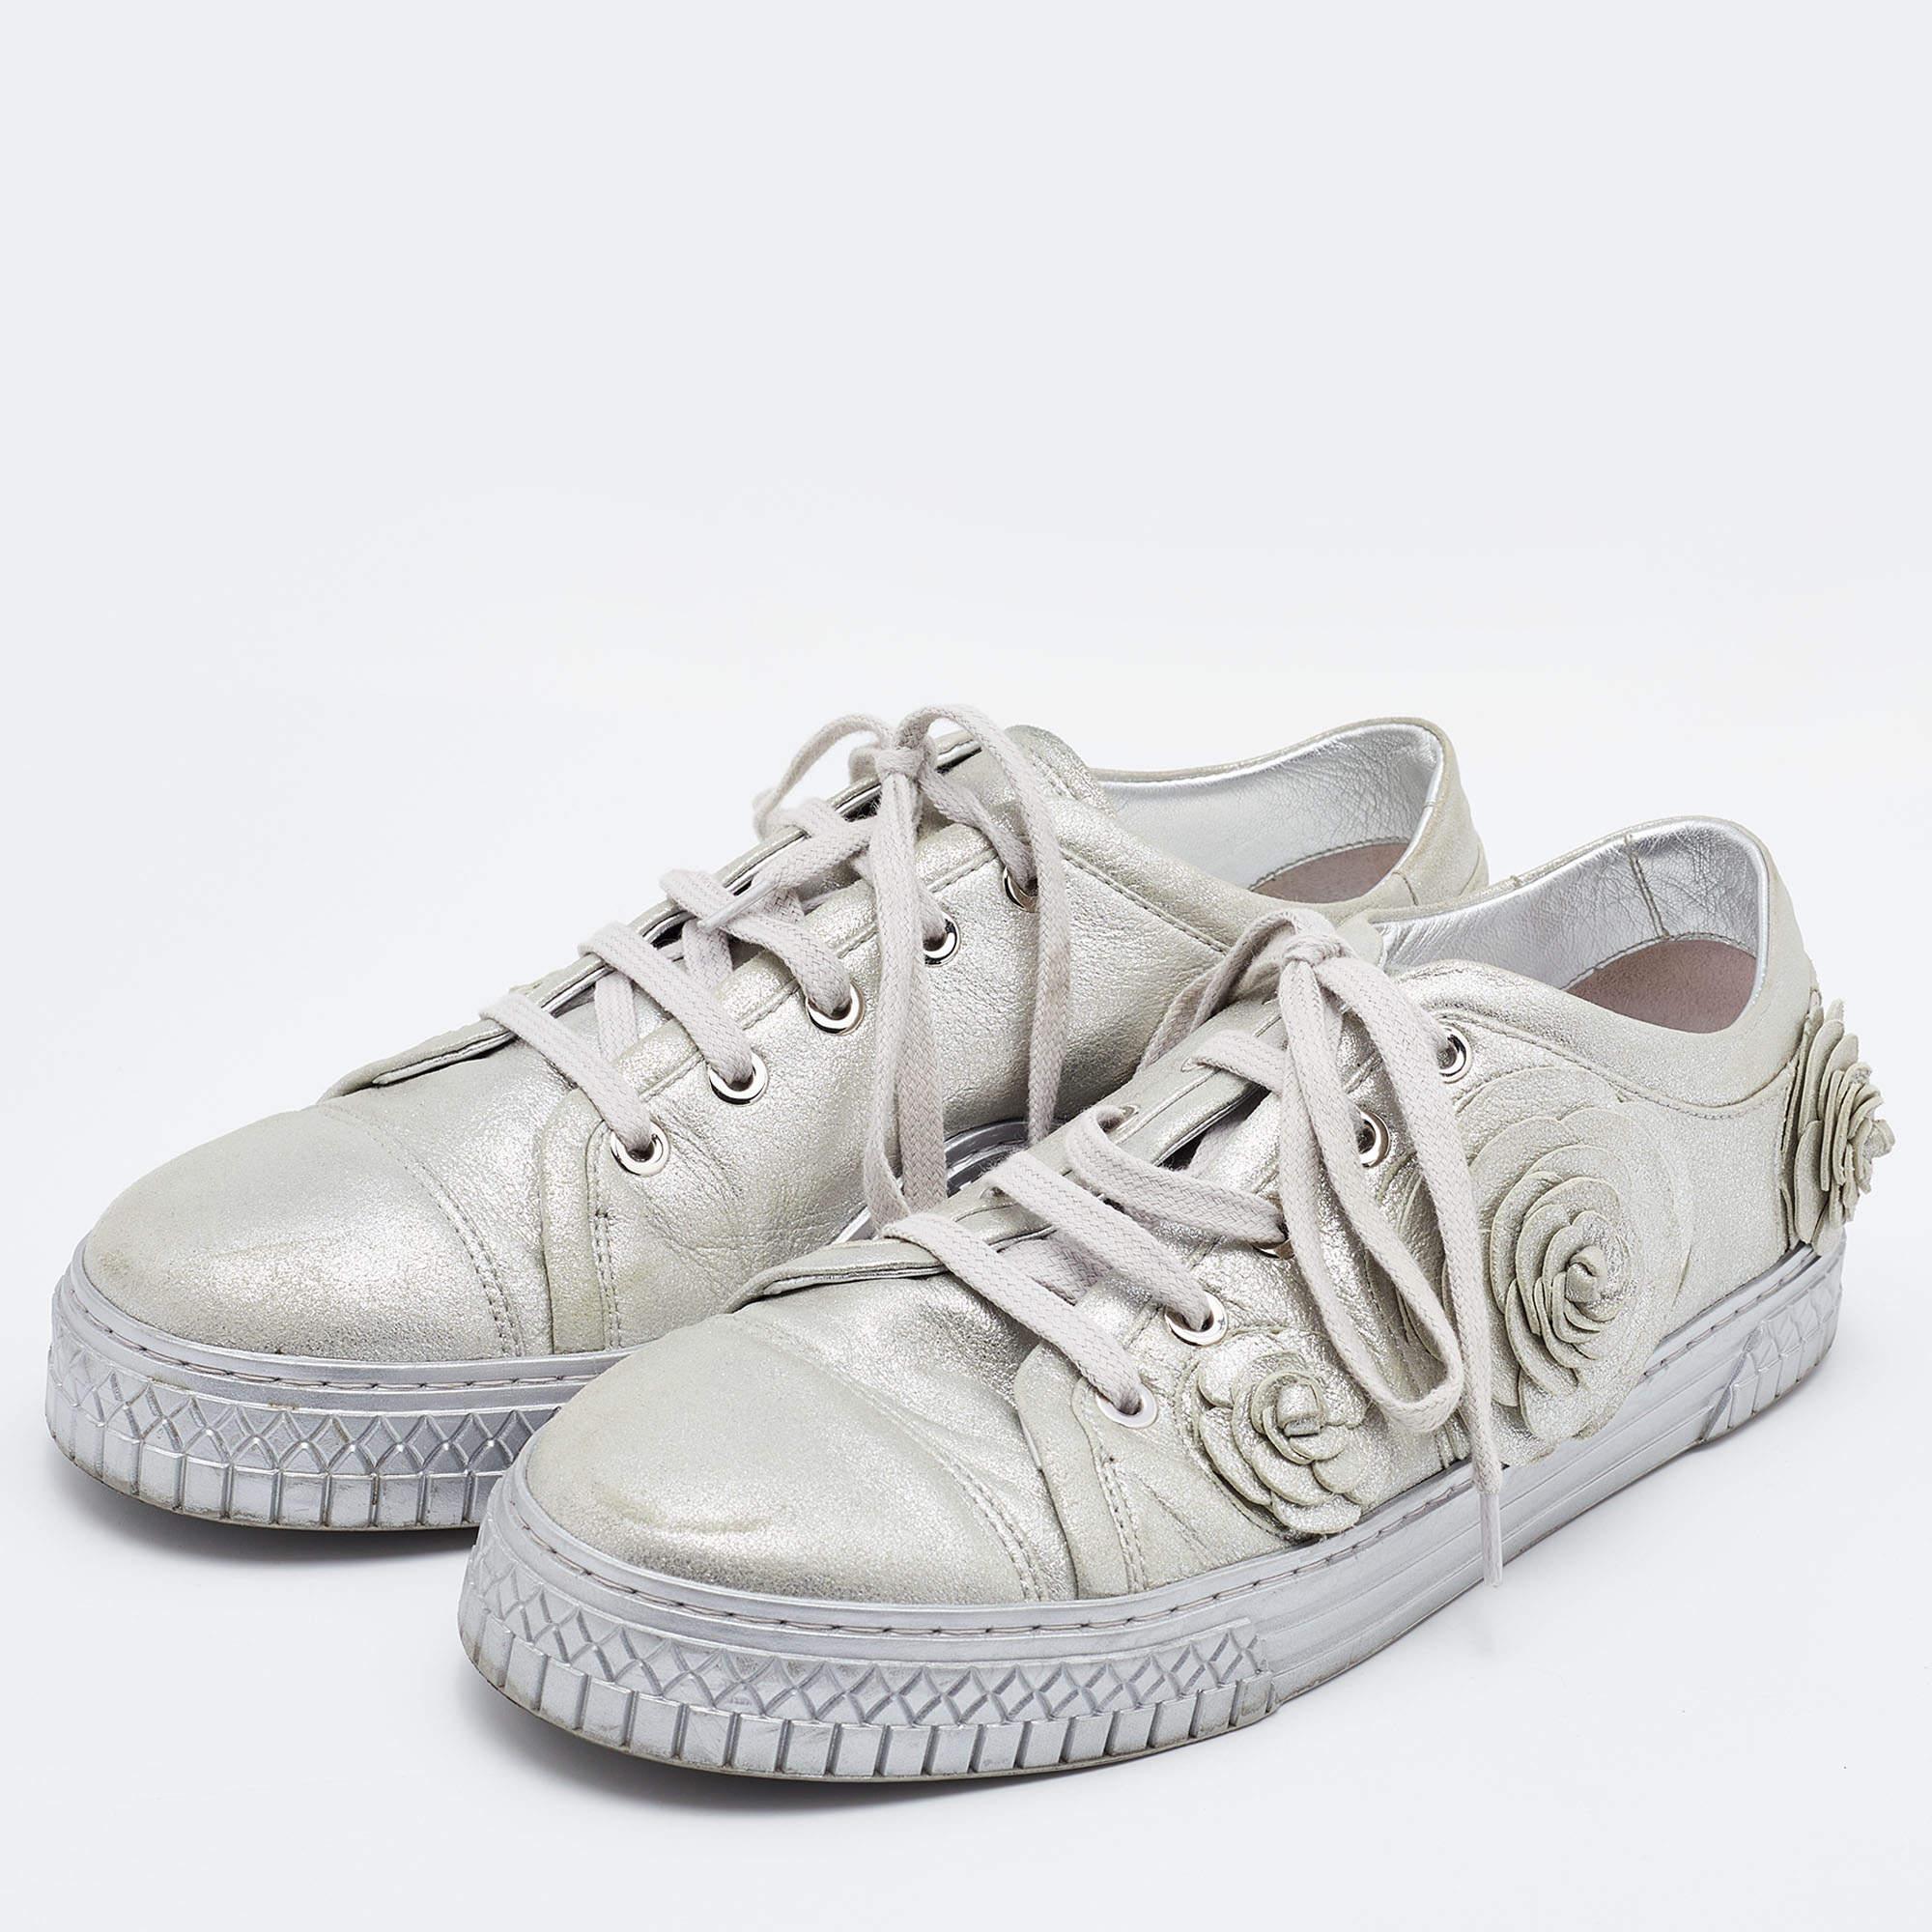 Women's Chanel Silver Suede Camellia Low-Top Sneakers Size 37